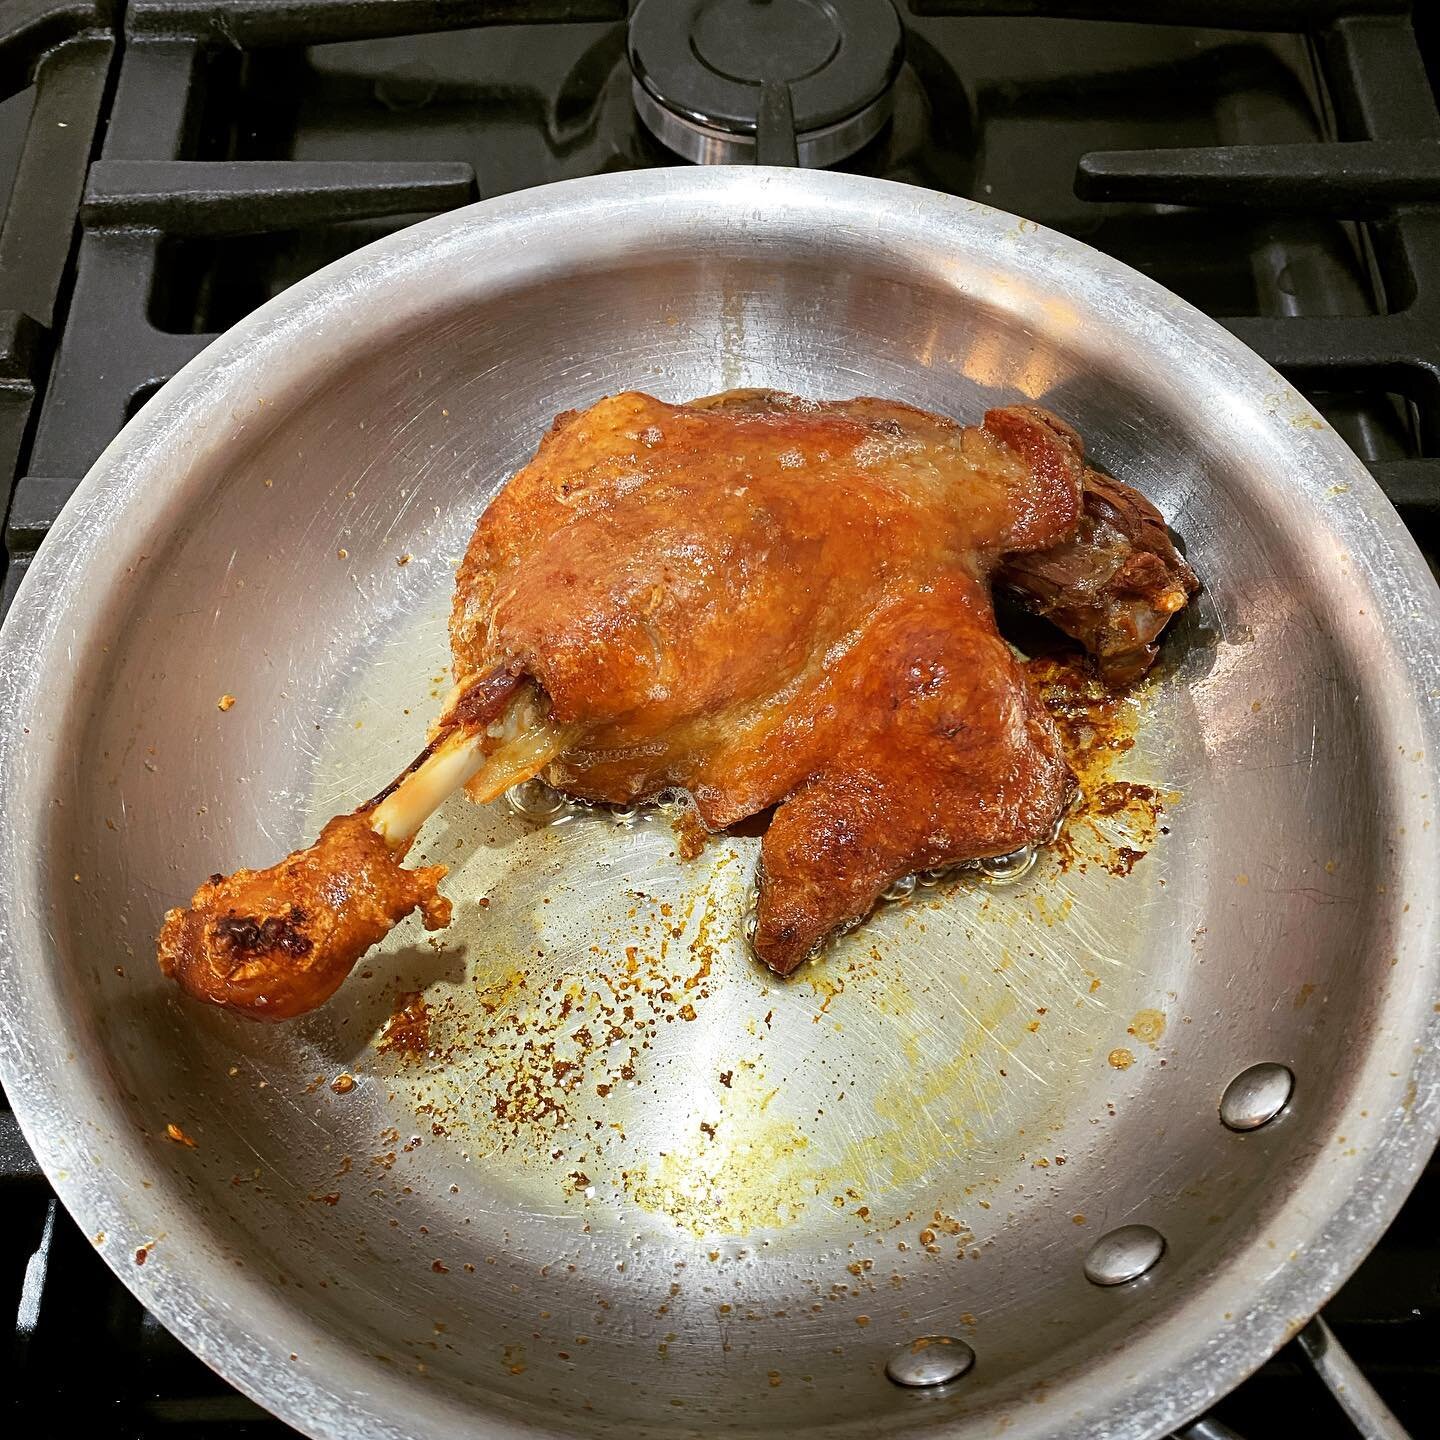 Dinner for one. 
#dinnerforone #duckconfit #frenchcooking ing #confit